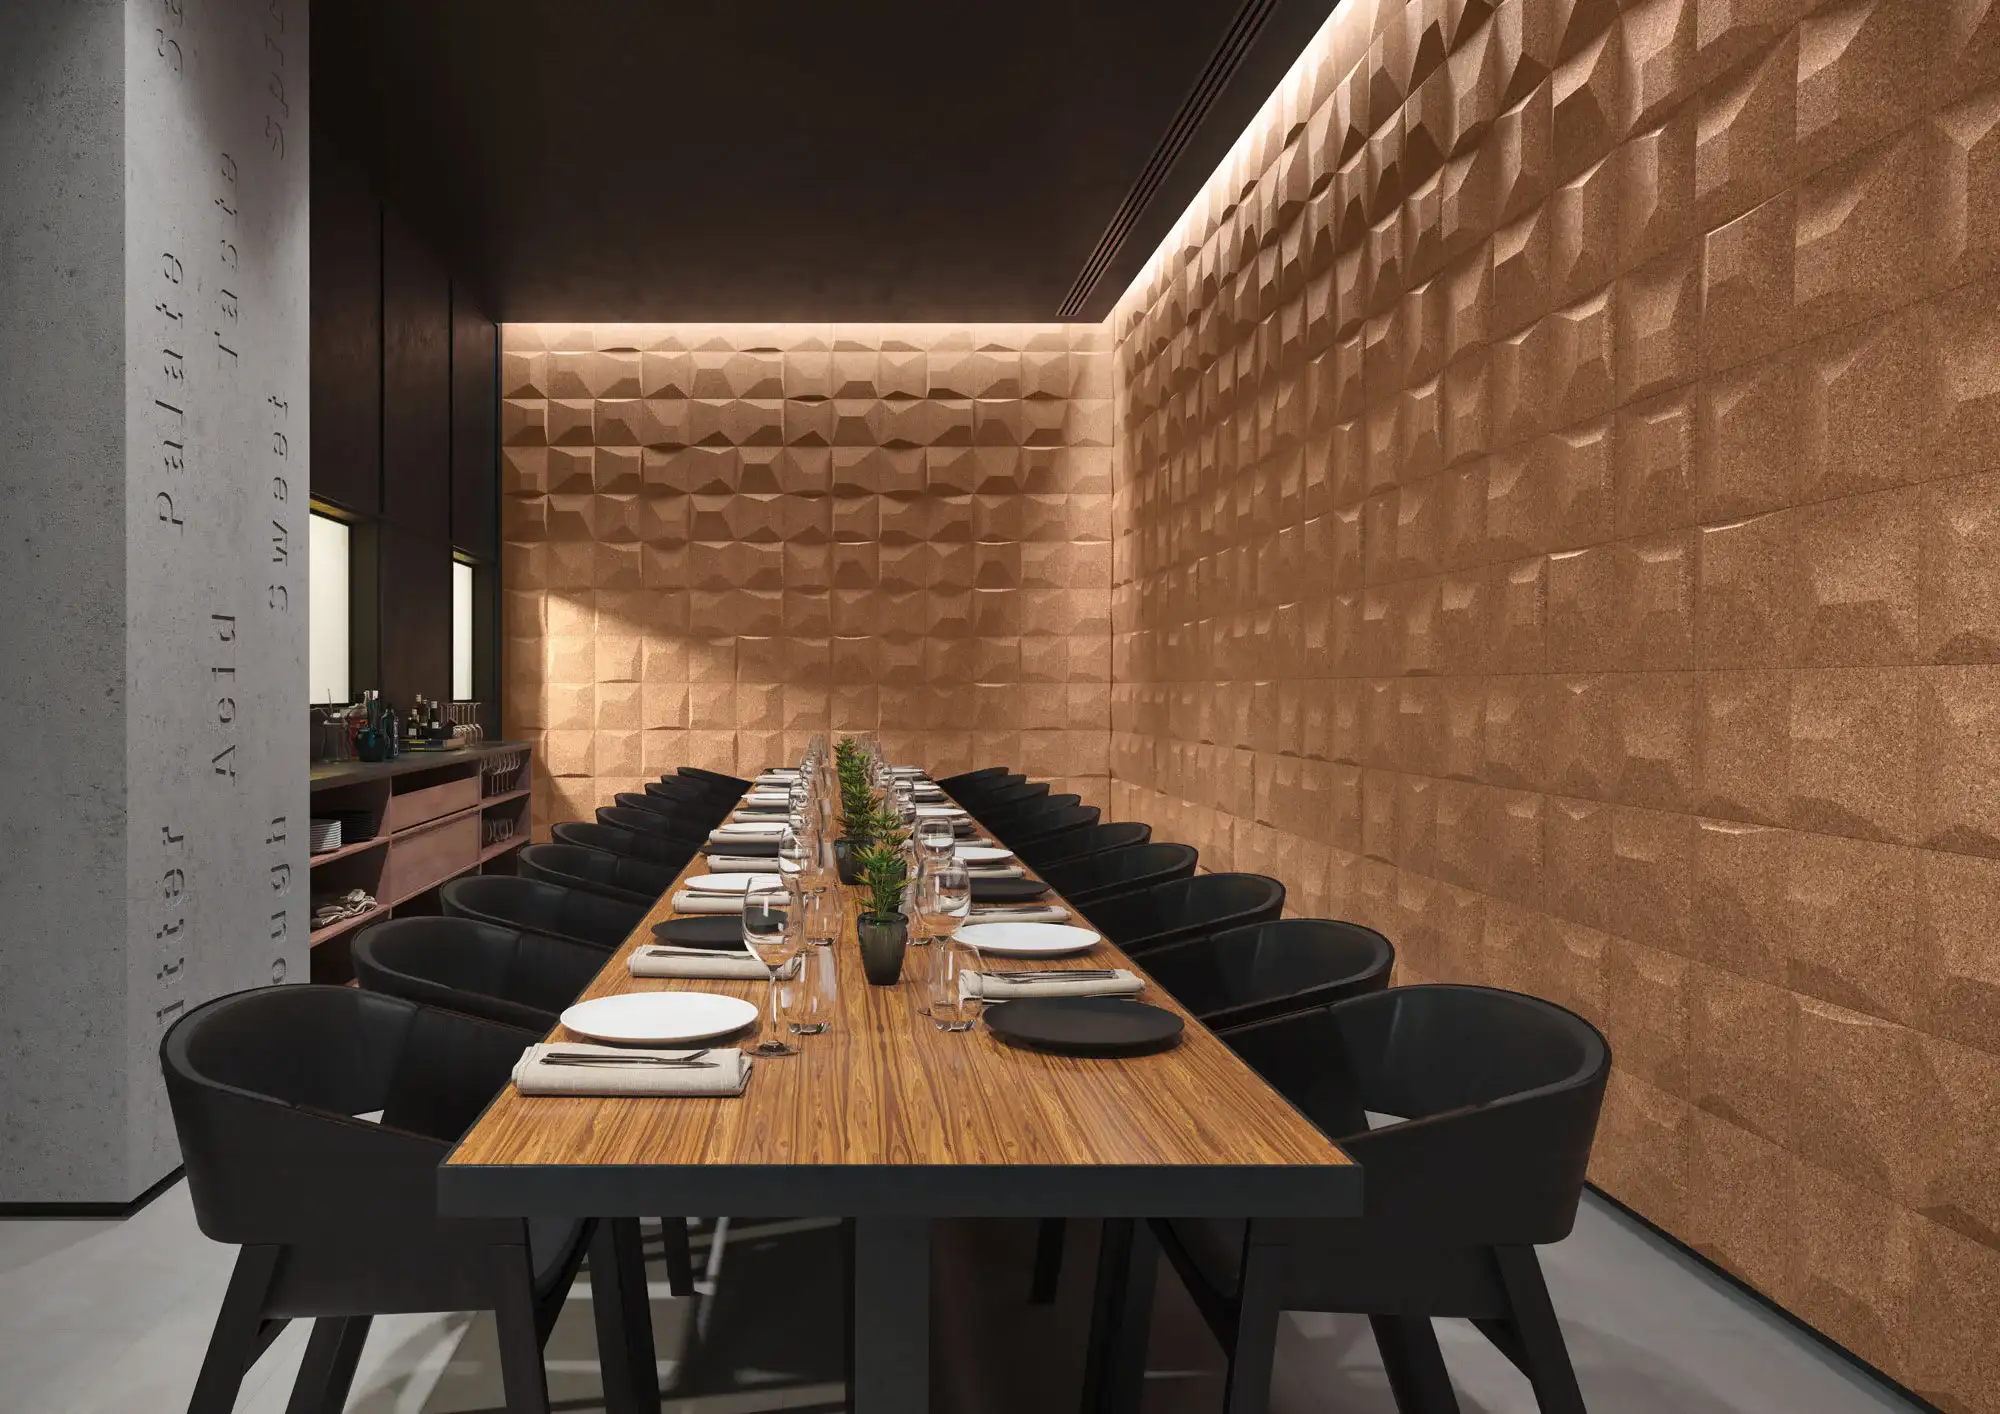 Acoustic wall panel made with cork with 3d features